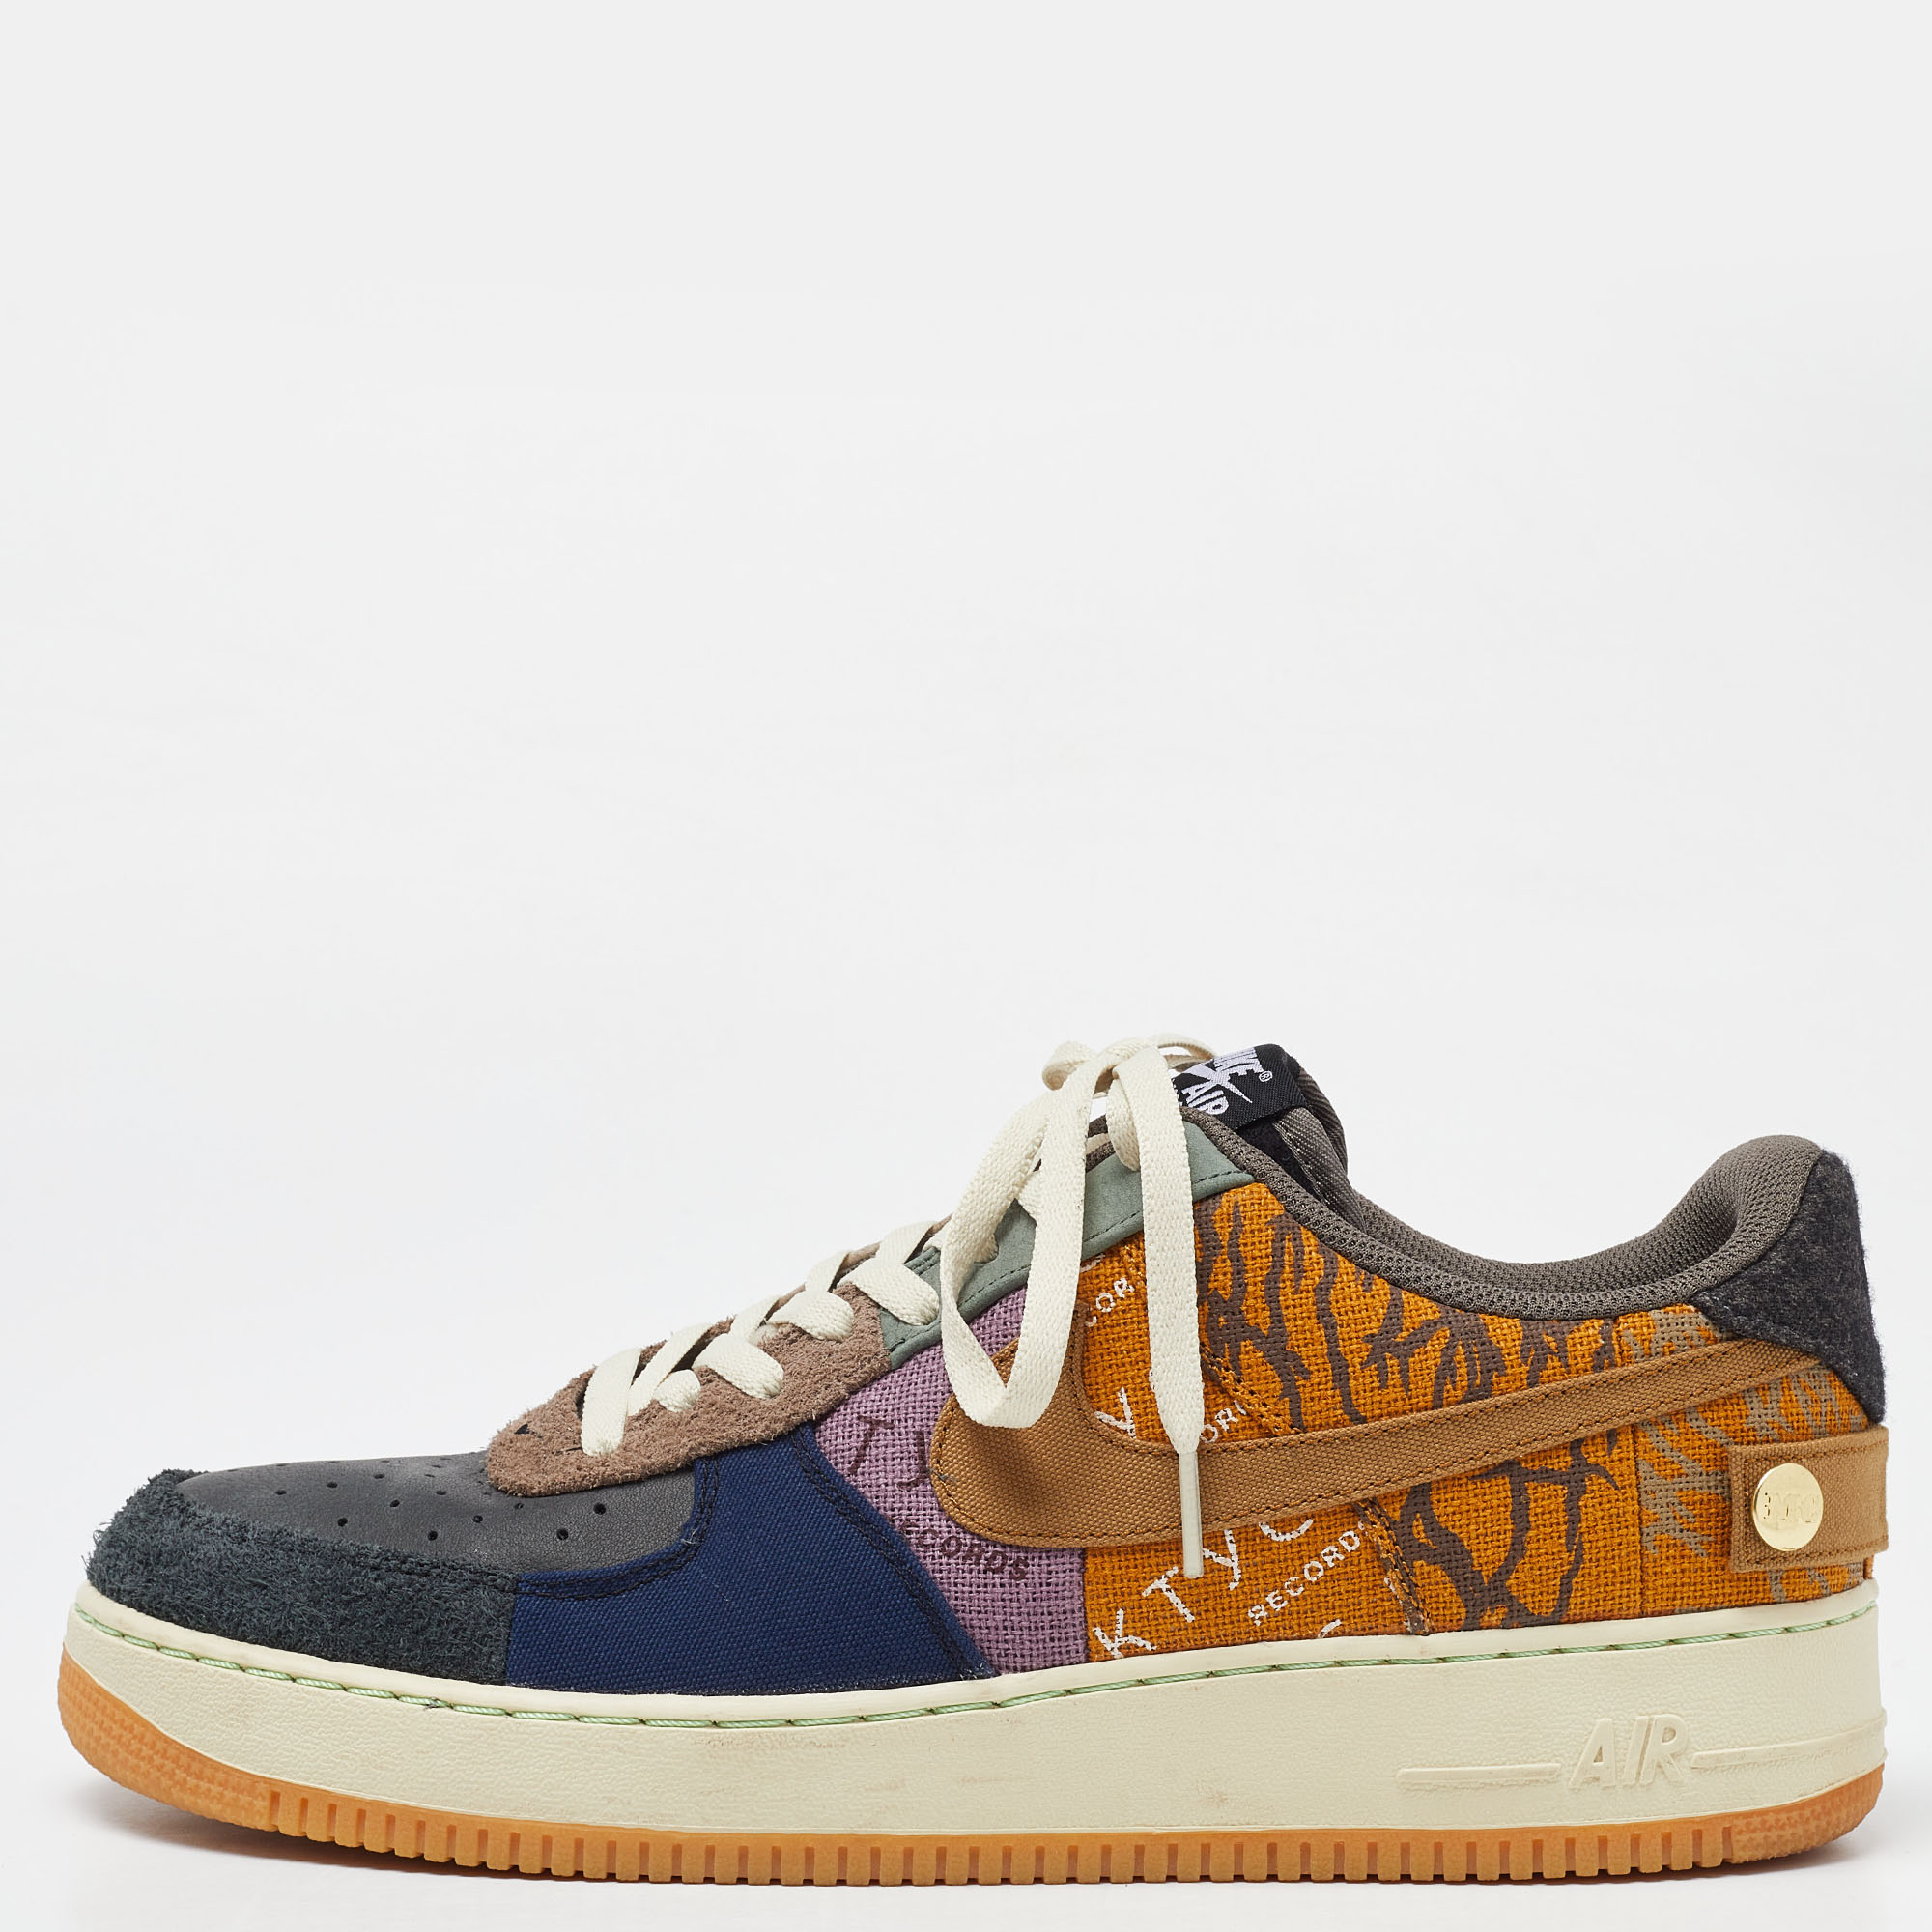 Elevate your footwear game with these Nike Air Force 1 Low Travis Scott Cactus Jack sneakers. Combining well loved elements and unmatched comfort these sneakers will look great on your feet.